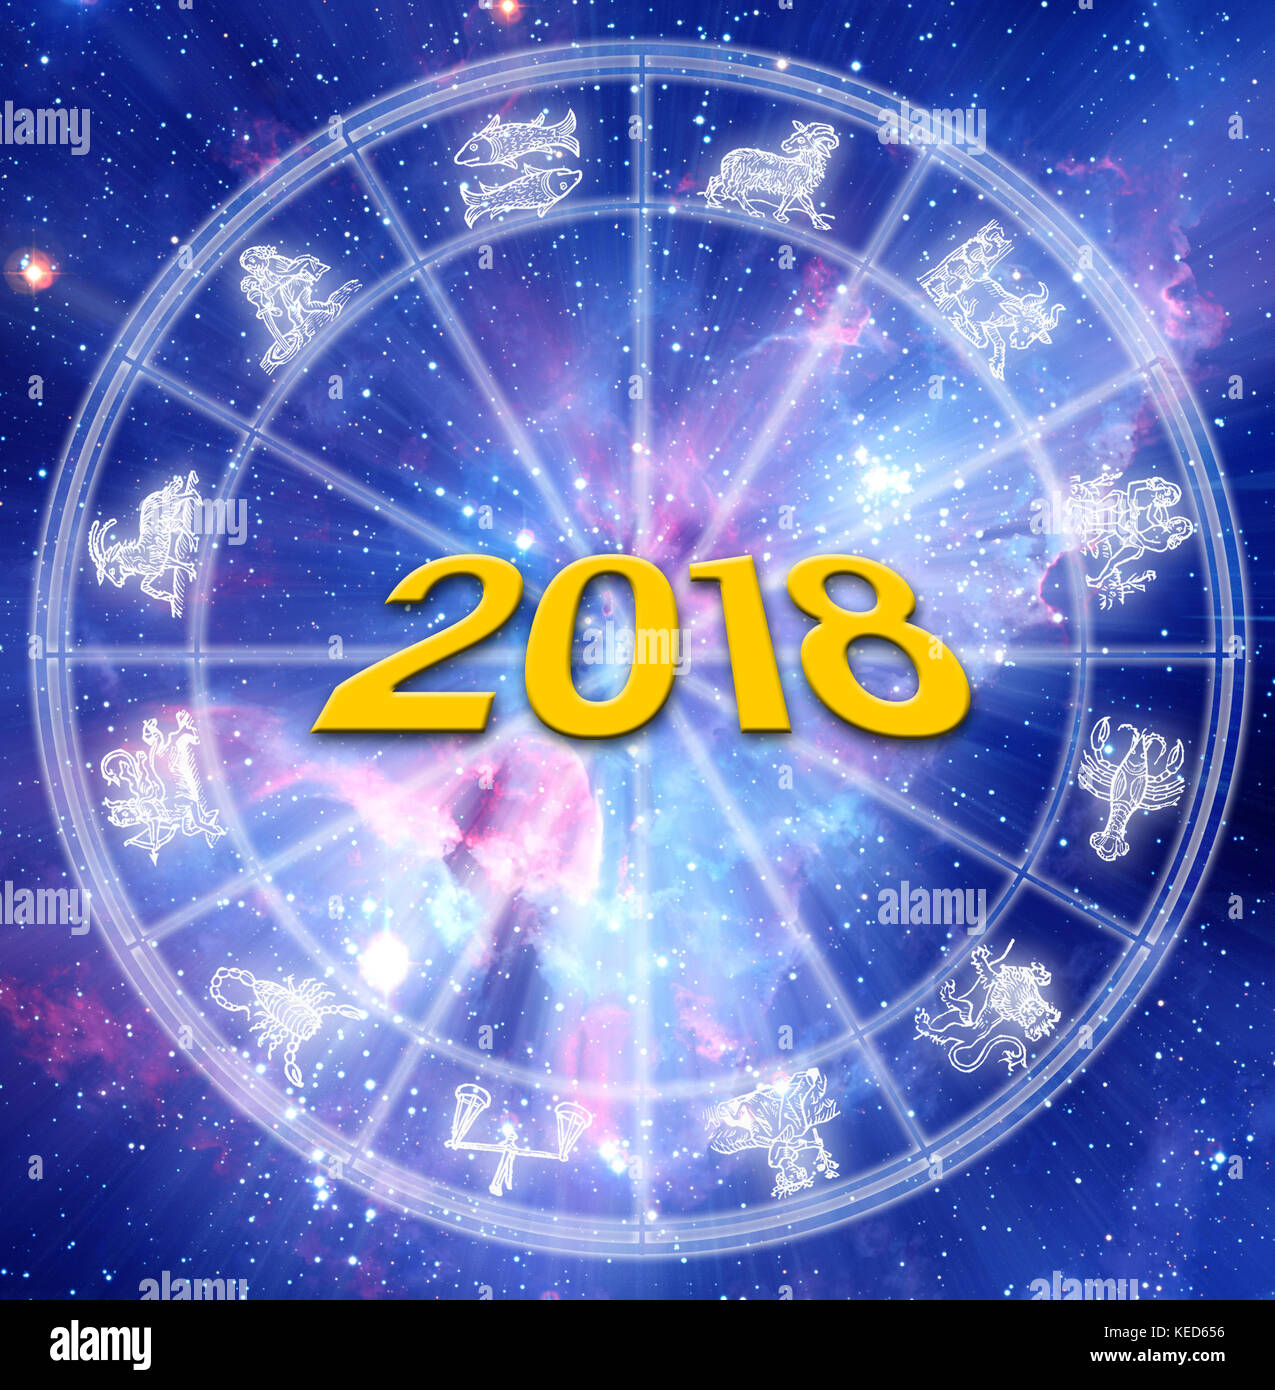 astrological dates and signs 2018